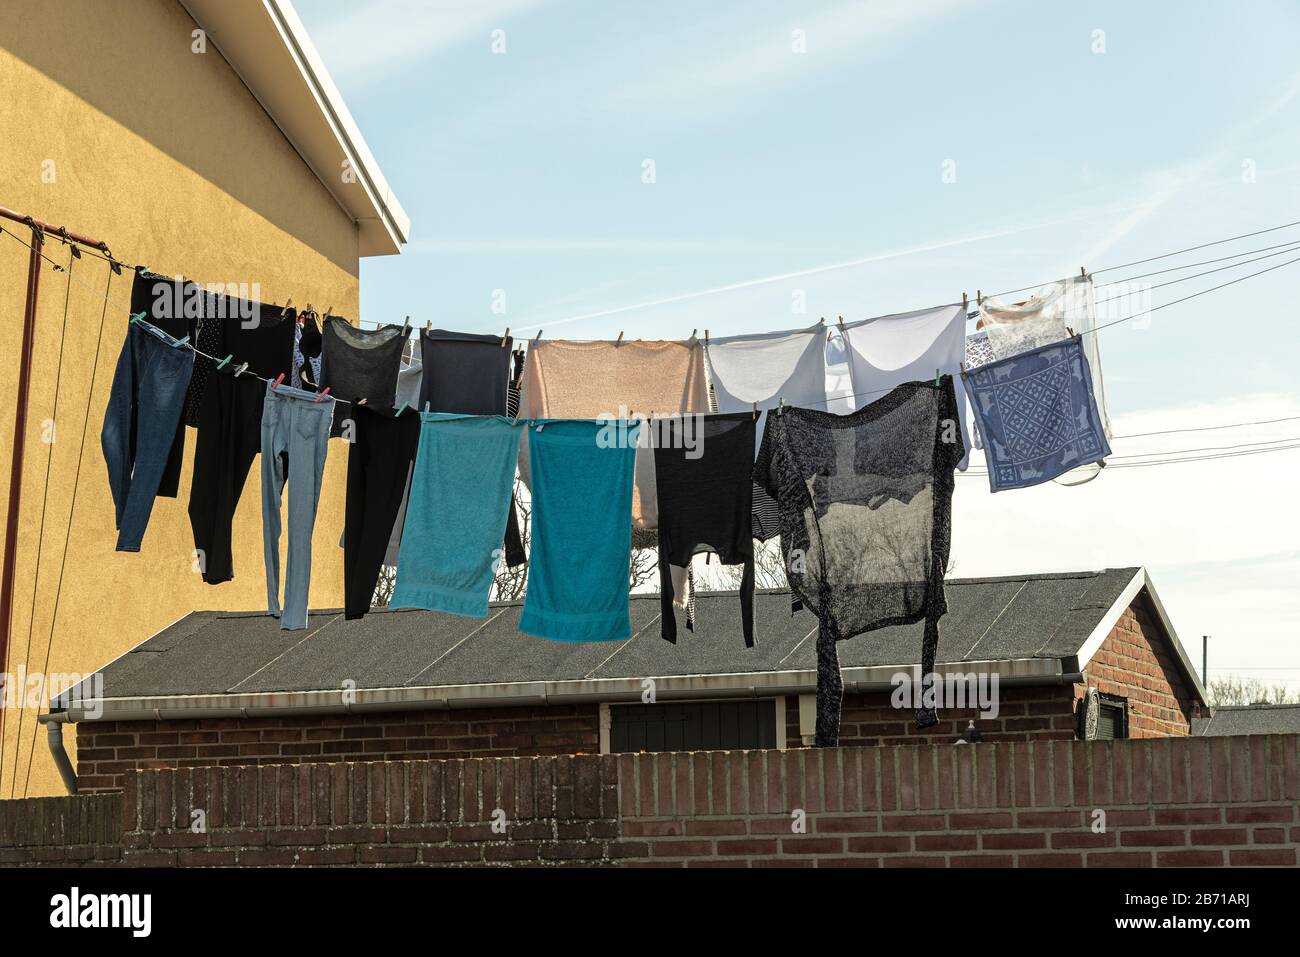 various laundry items in various colors hang outside on the washing line Stock Photo